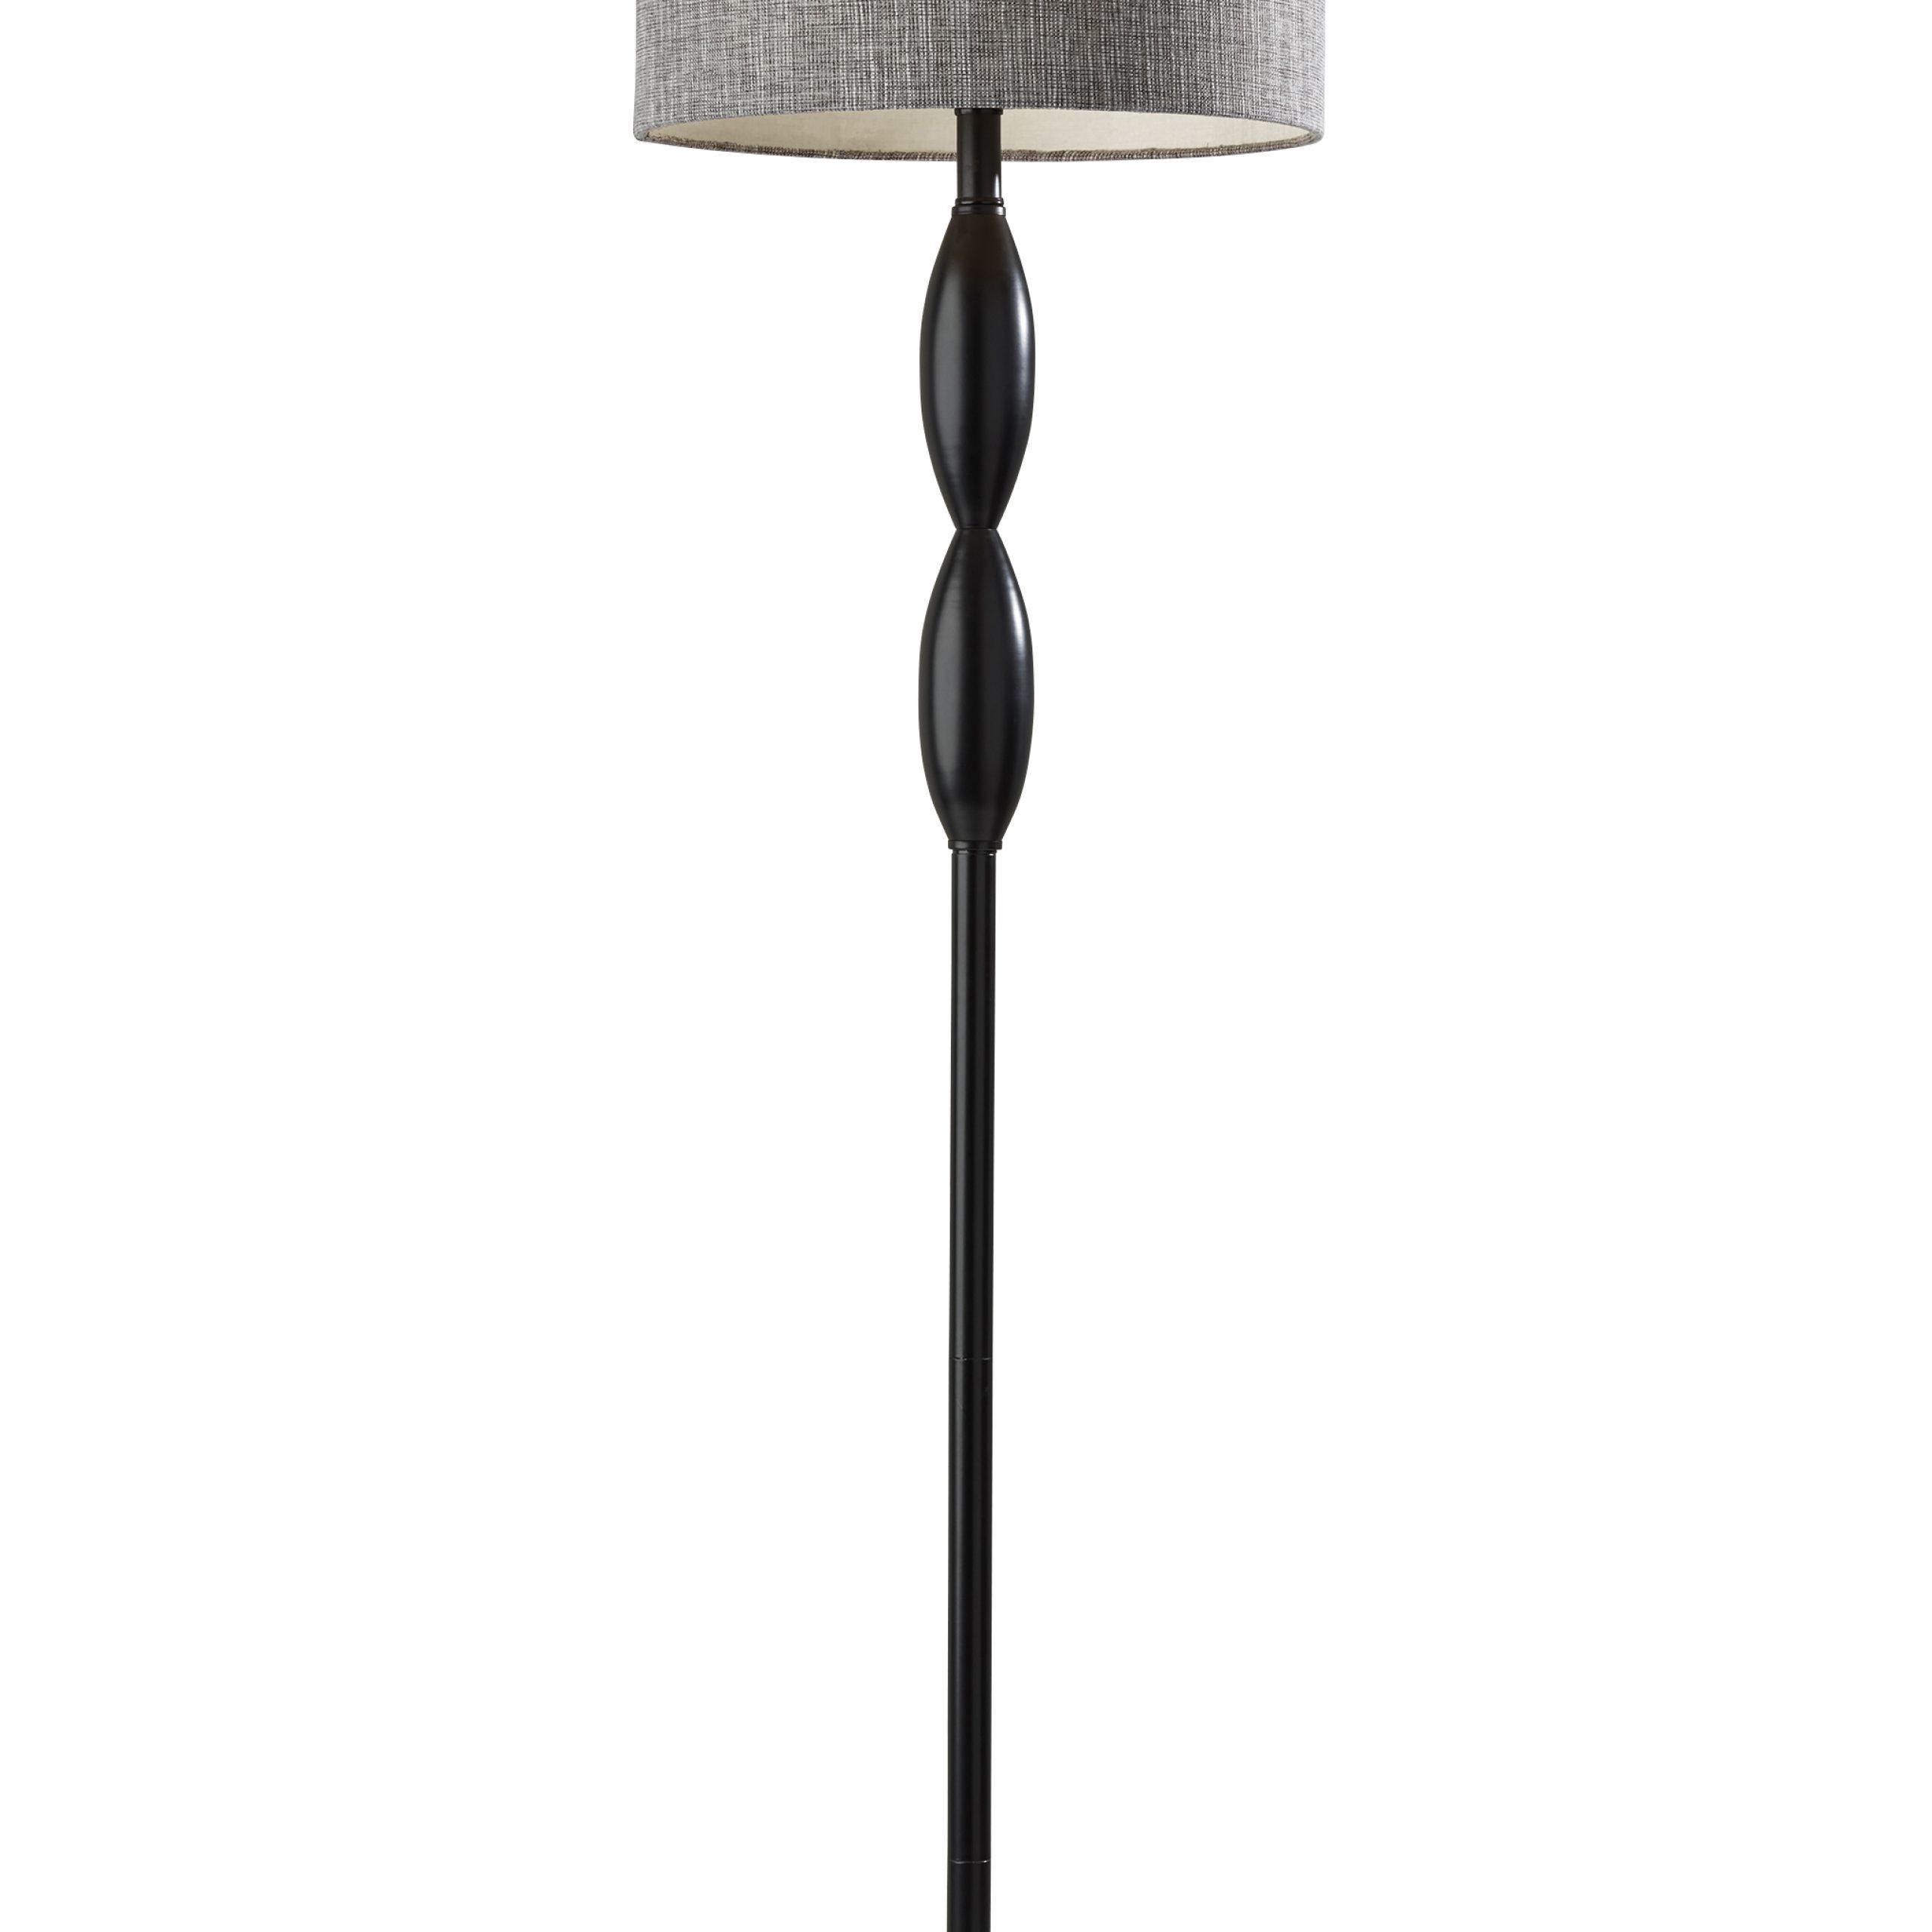 Adesso Lance Floor Lamp Black, Dark Grey And White Textured Fabric Shade –  Walmart With Regard To Grey Textured Floor Lamps (View 5 of 15)